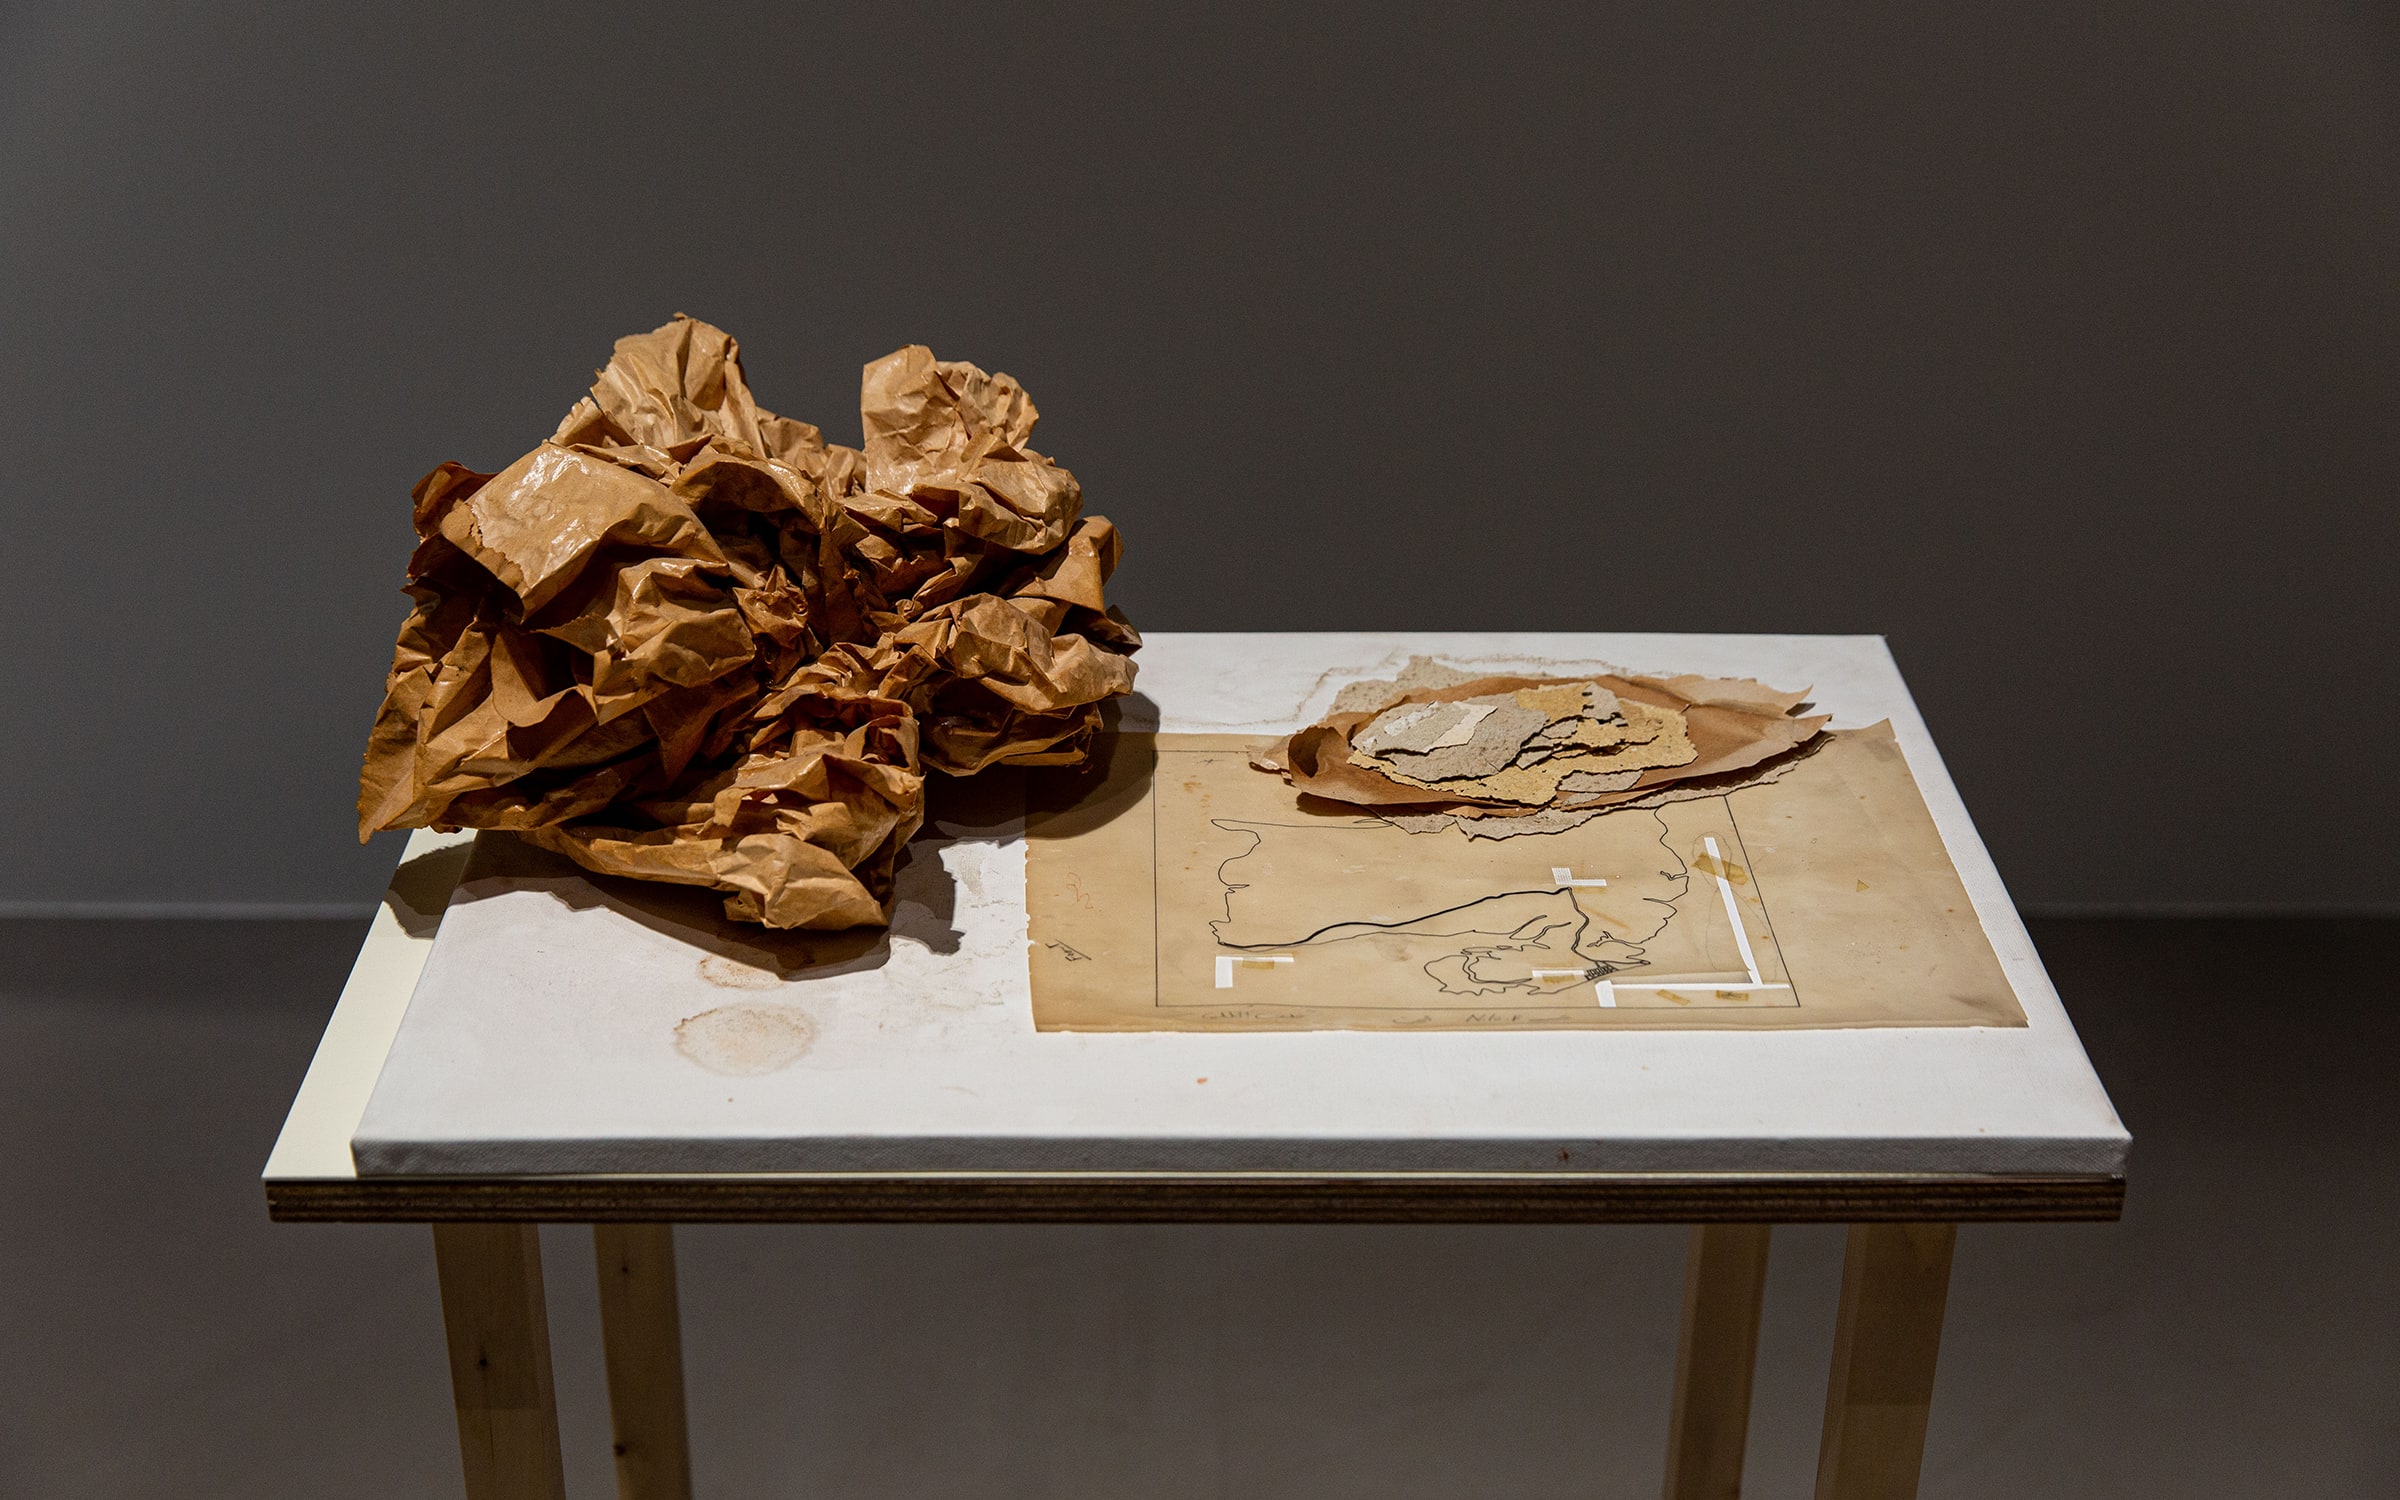 Nesrine Khodr, Sculptured Decompositions, 2019-20123. Courtesy of the artist and Taipei Fine Arts Museum.